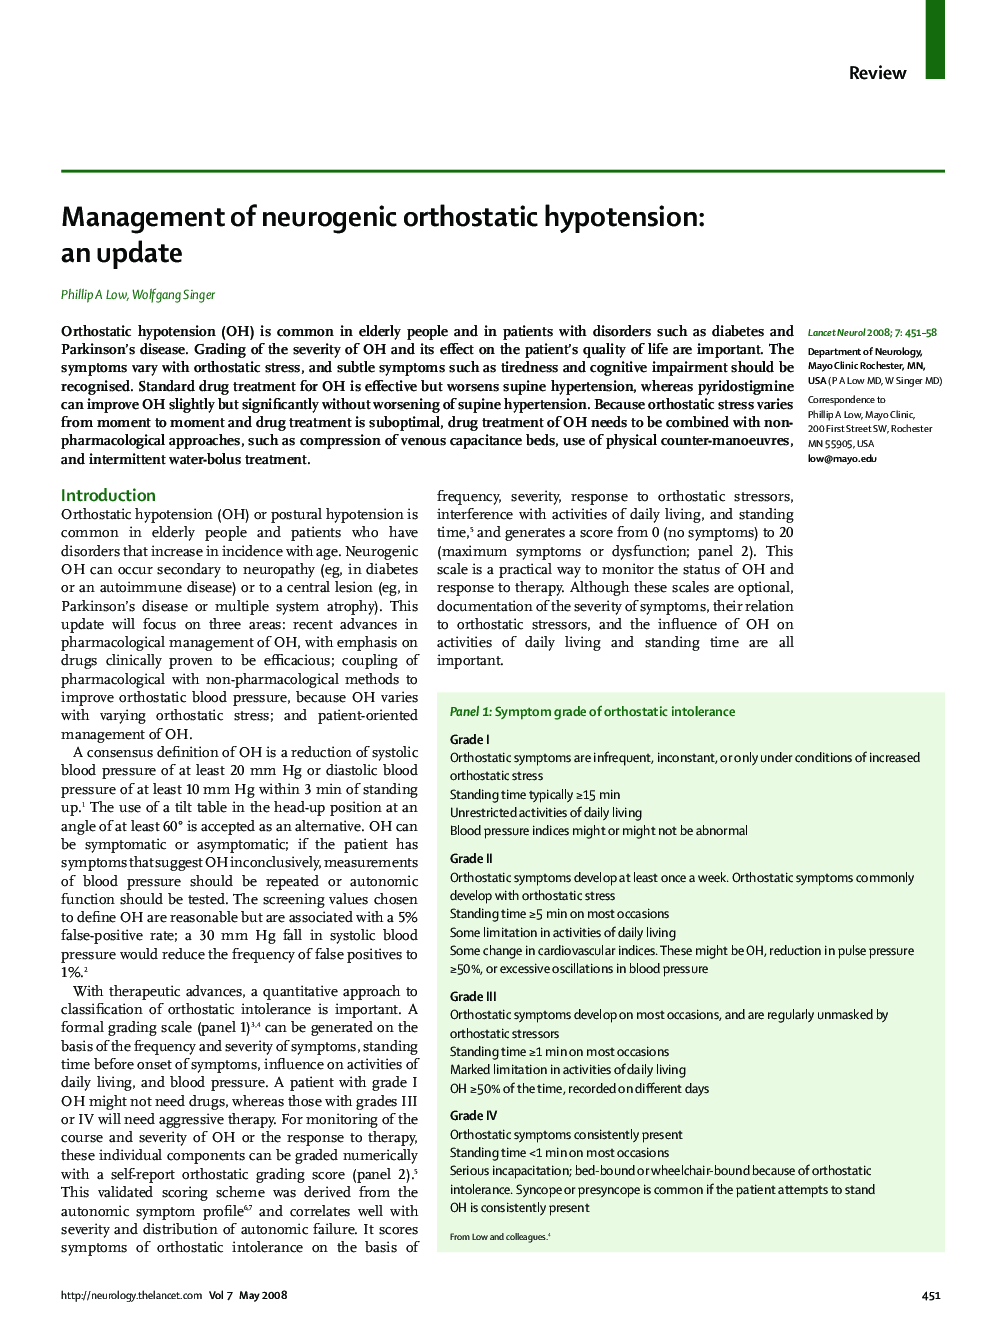 Management of neurogenic orthostatic hypotension: an update